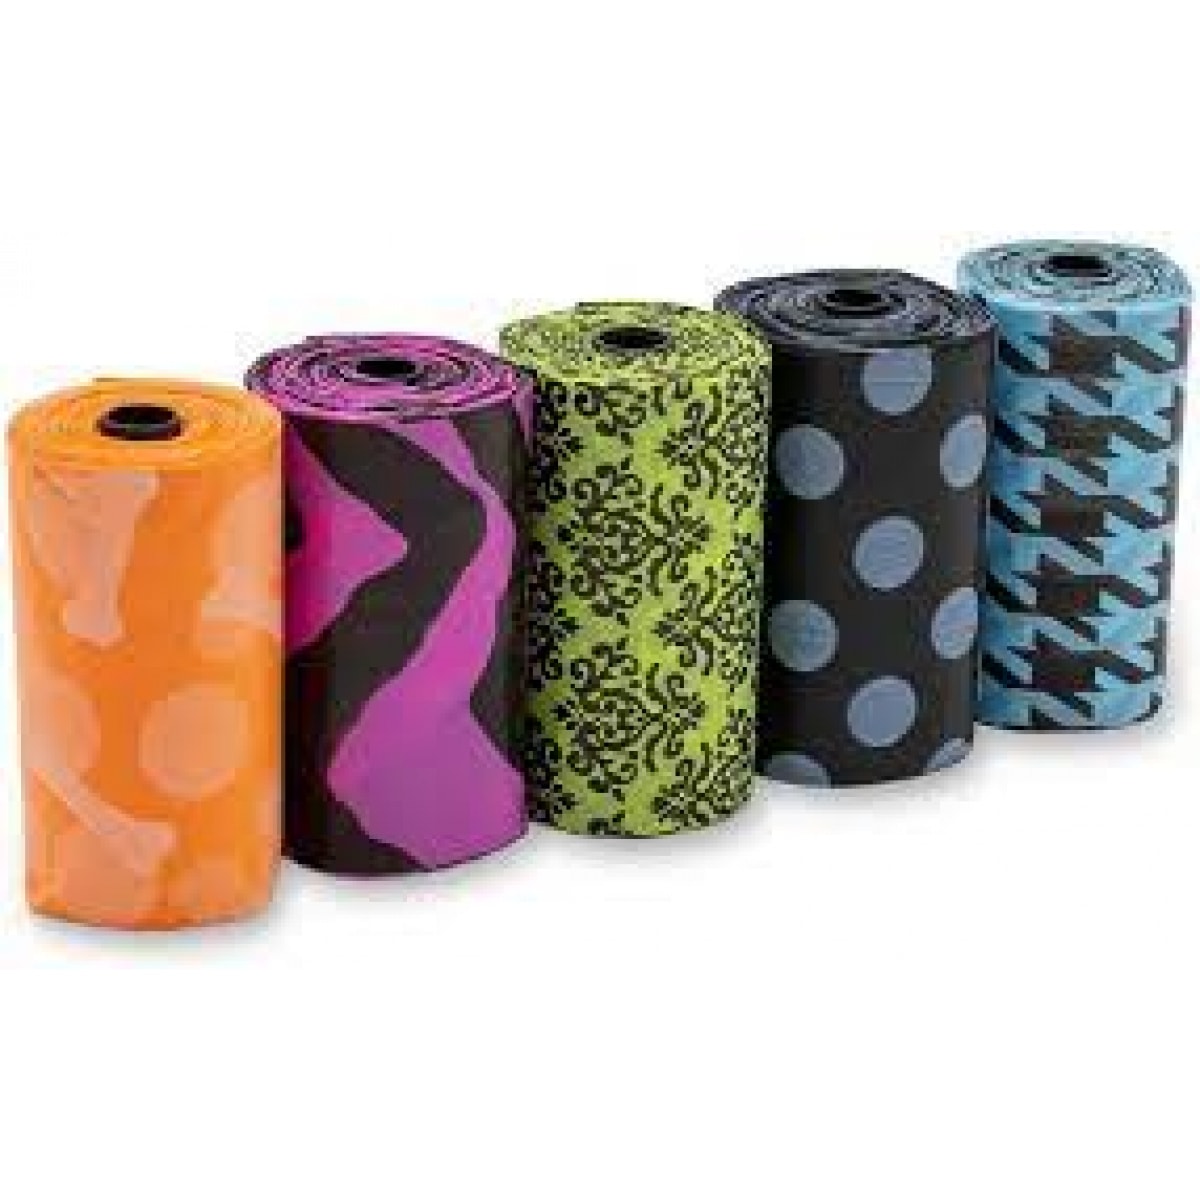 Assorted Poo Bag Rolls Product Image